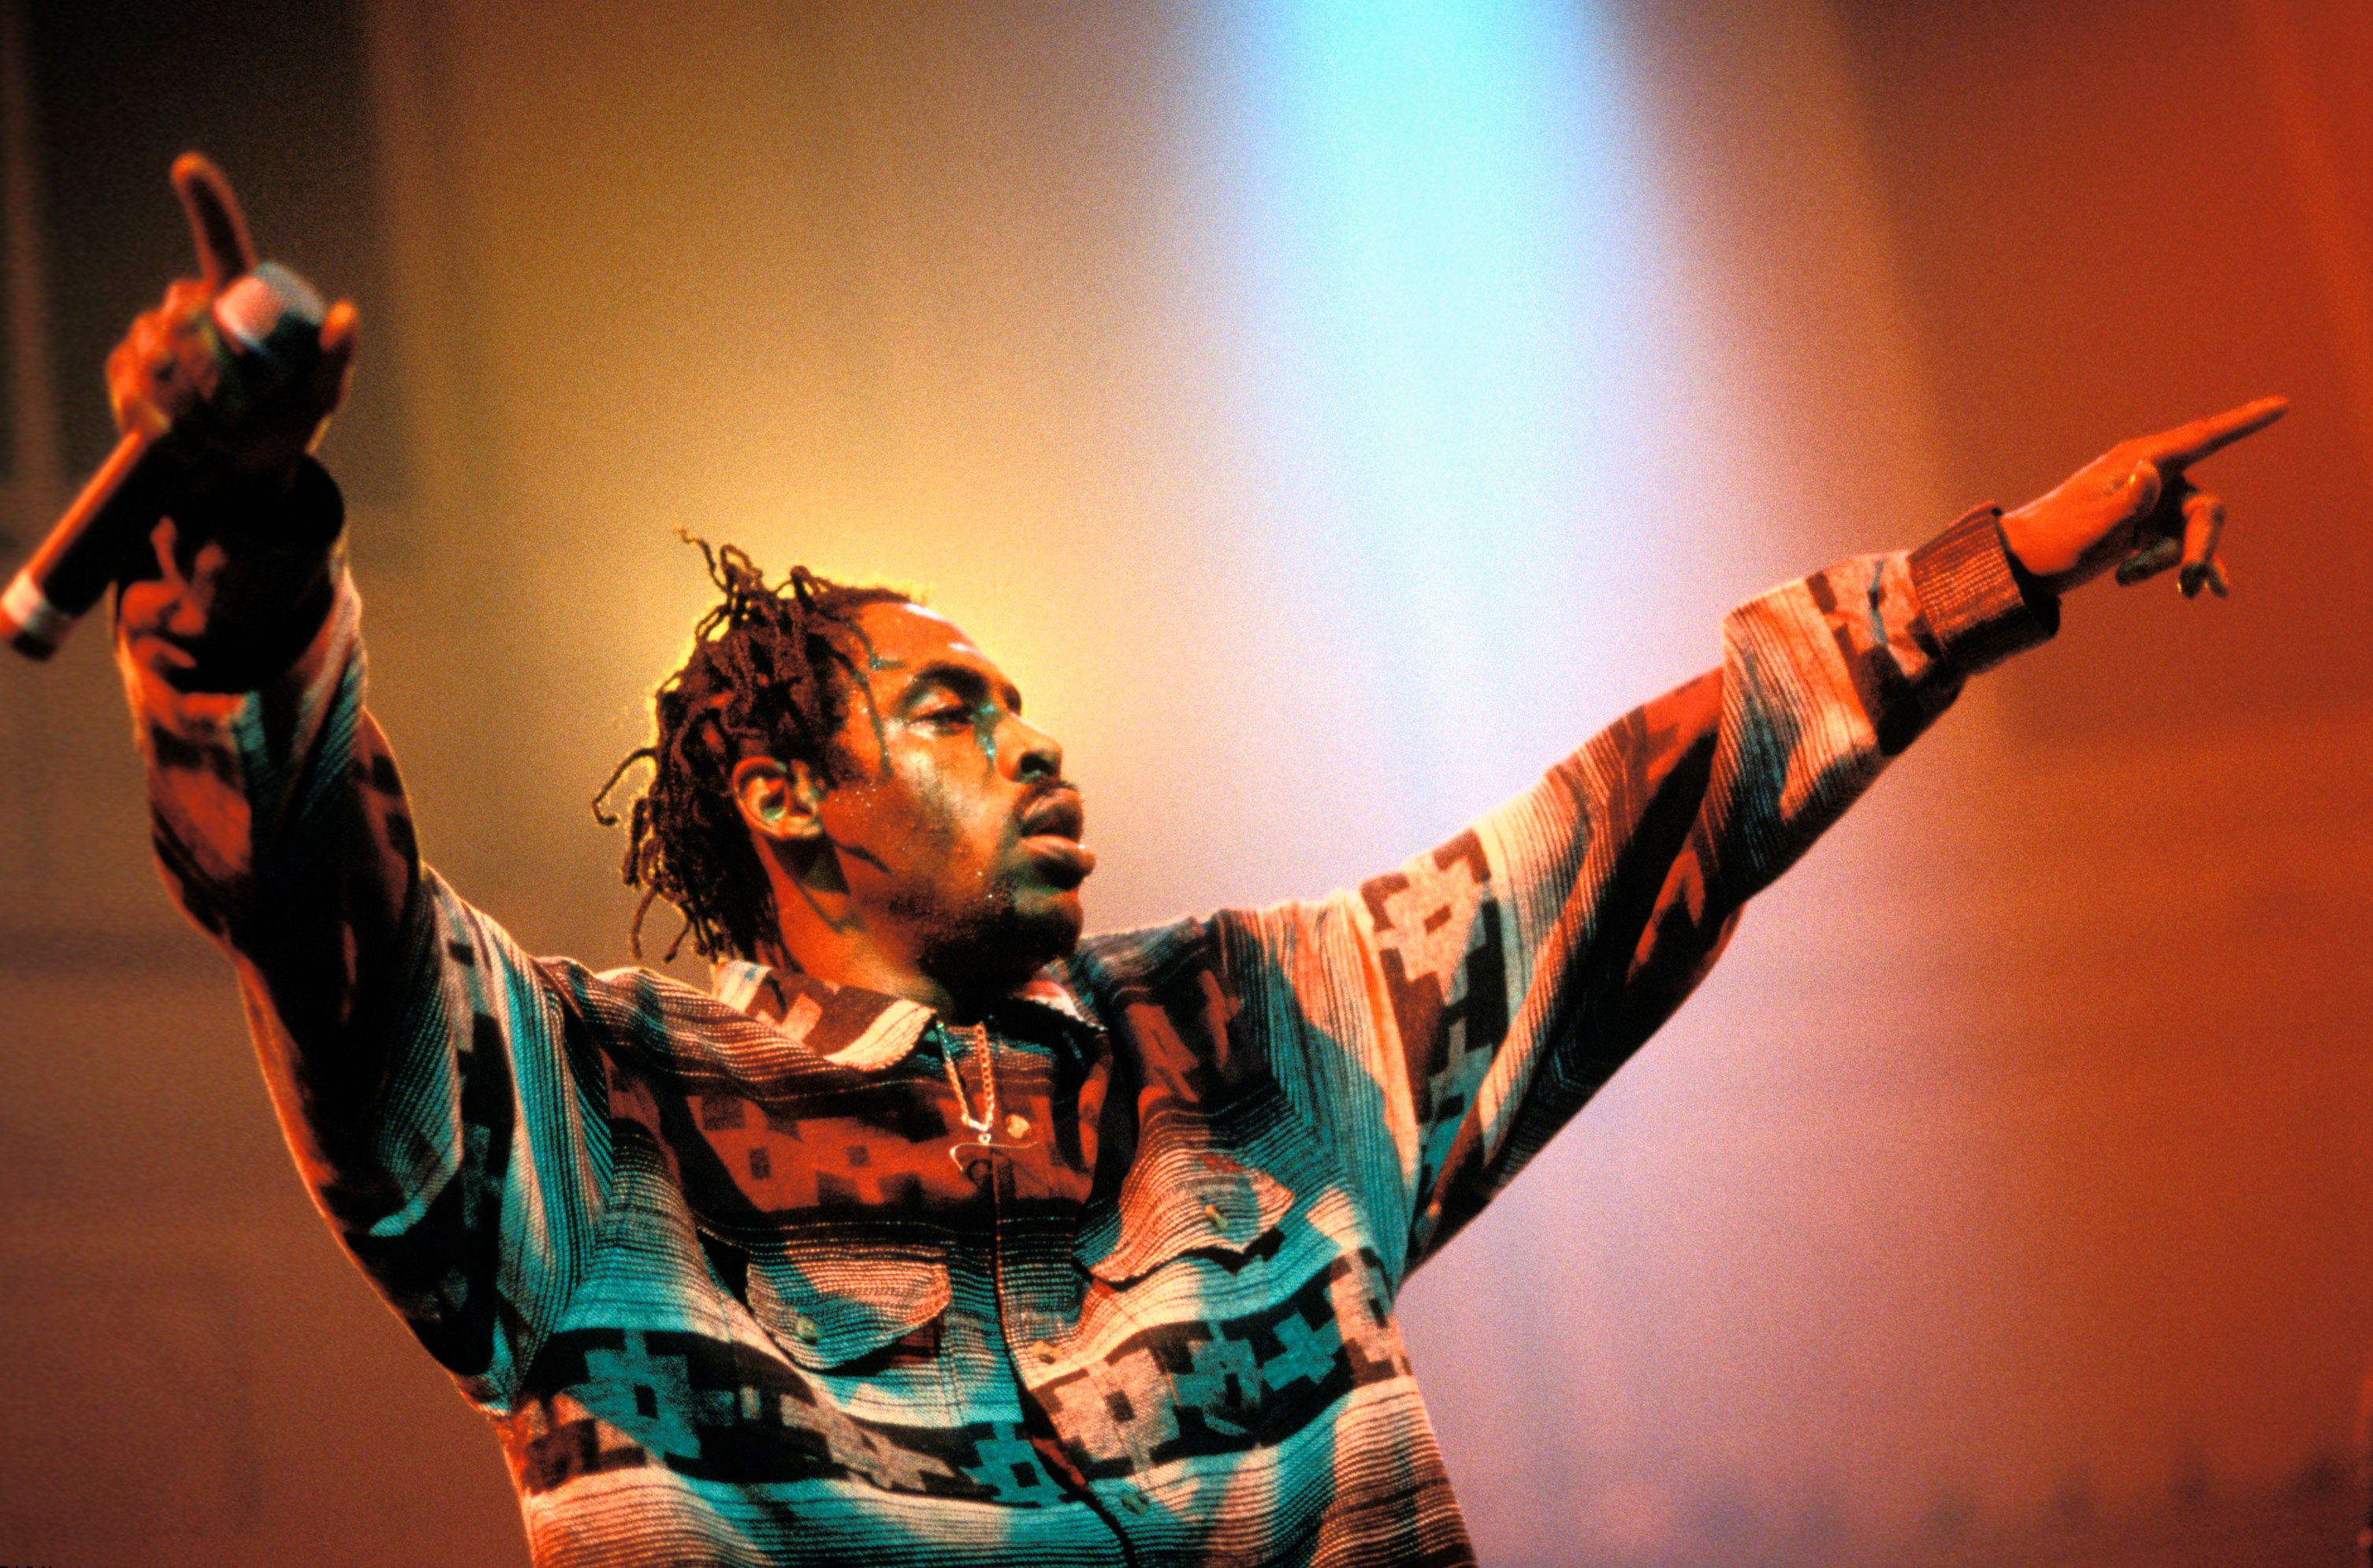 Coolio raises his hands and performs during a concert.